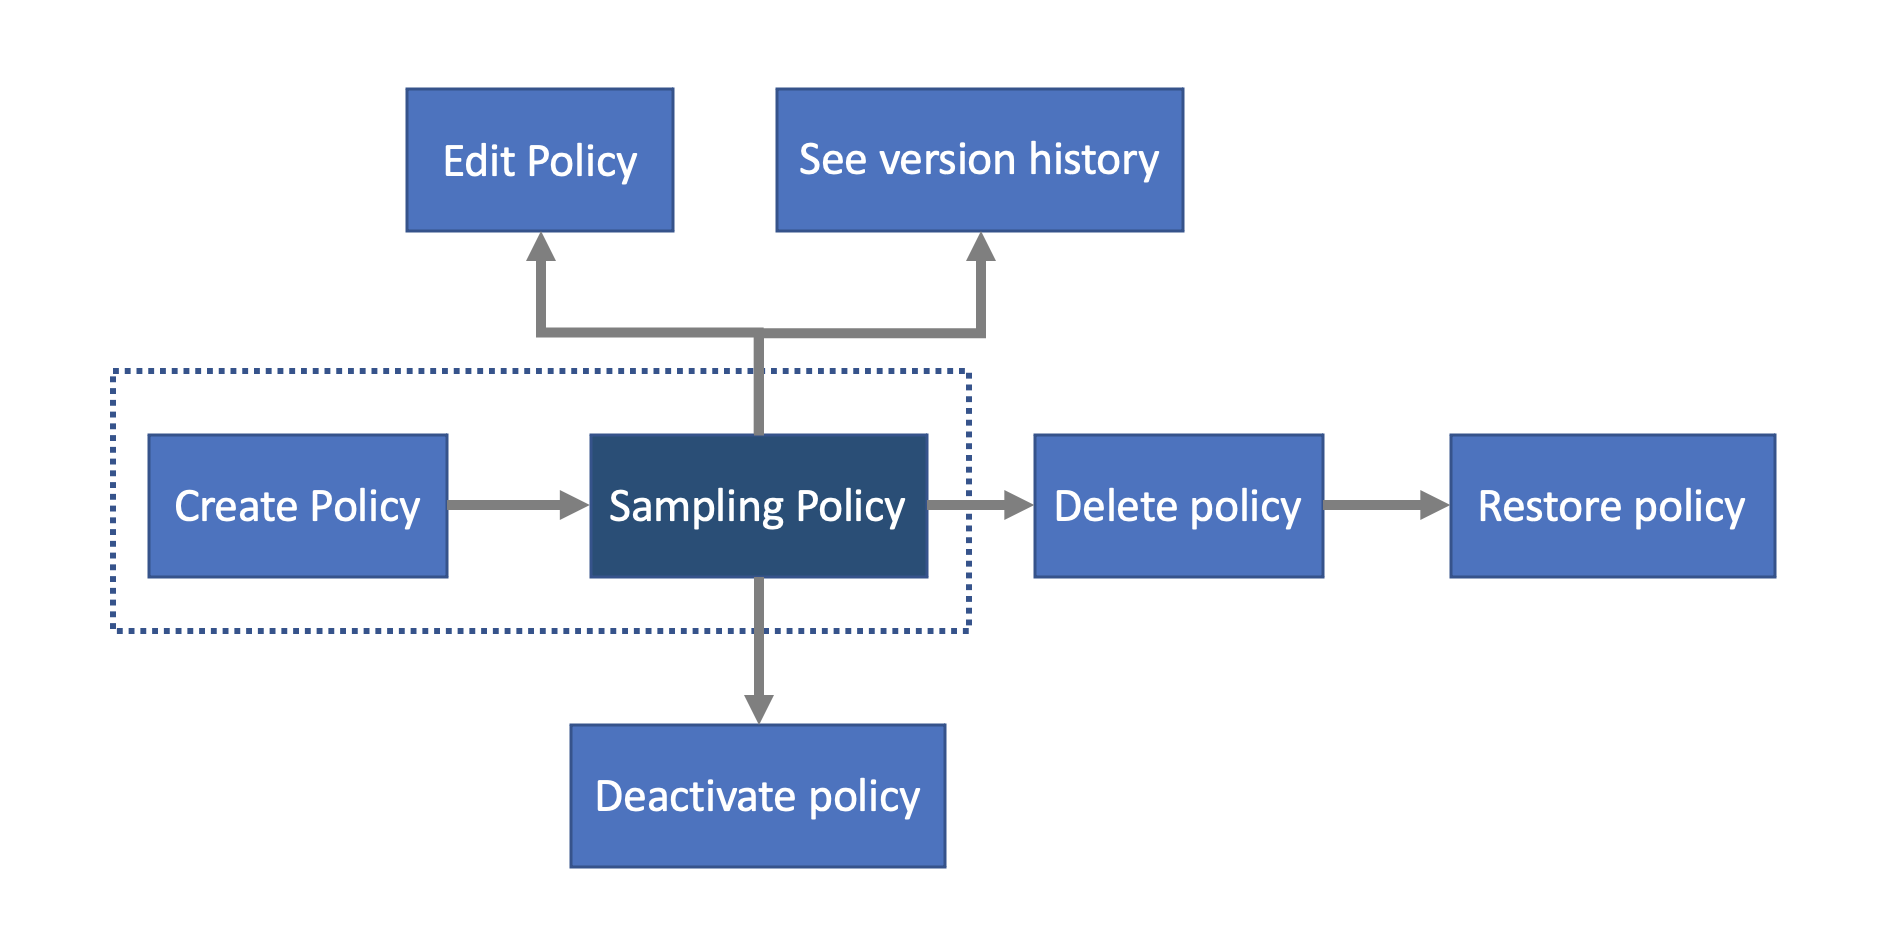 This diagrams shows the user flow from creating a policy, to edititng, deleting, restoring, deactivation, and seeing teh version history of a policy.